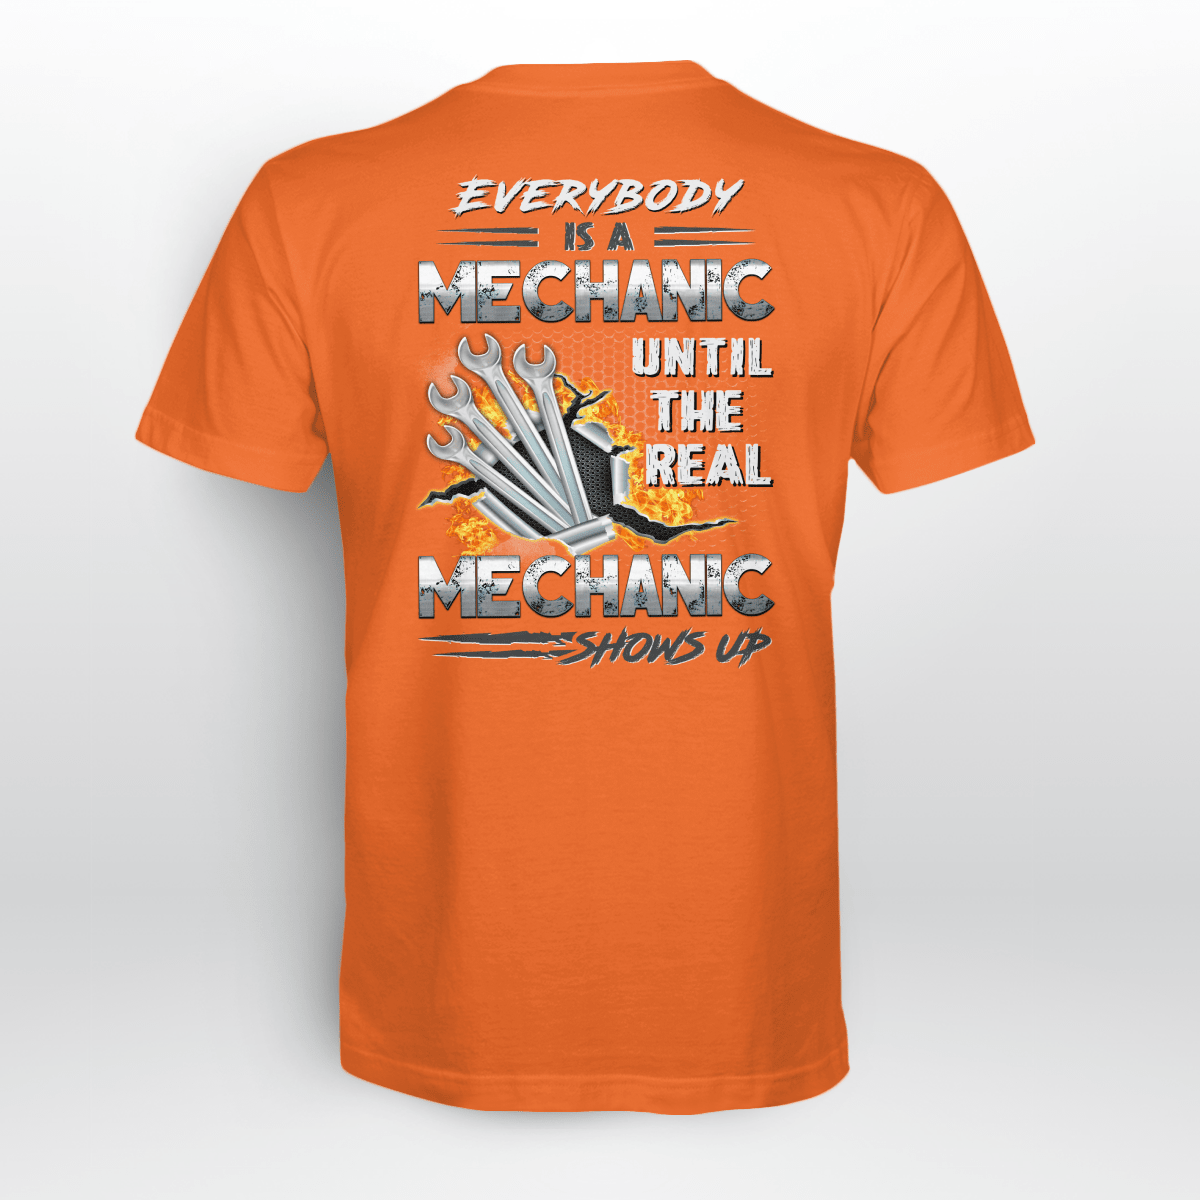 The Real Mechanic Shows Up-T-Shirt -#M250423SHOW23BMECHZ6